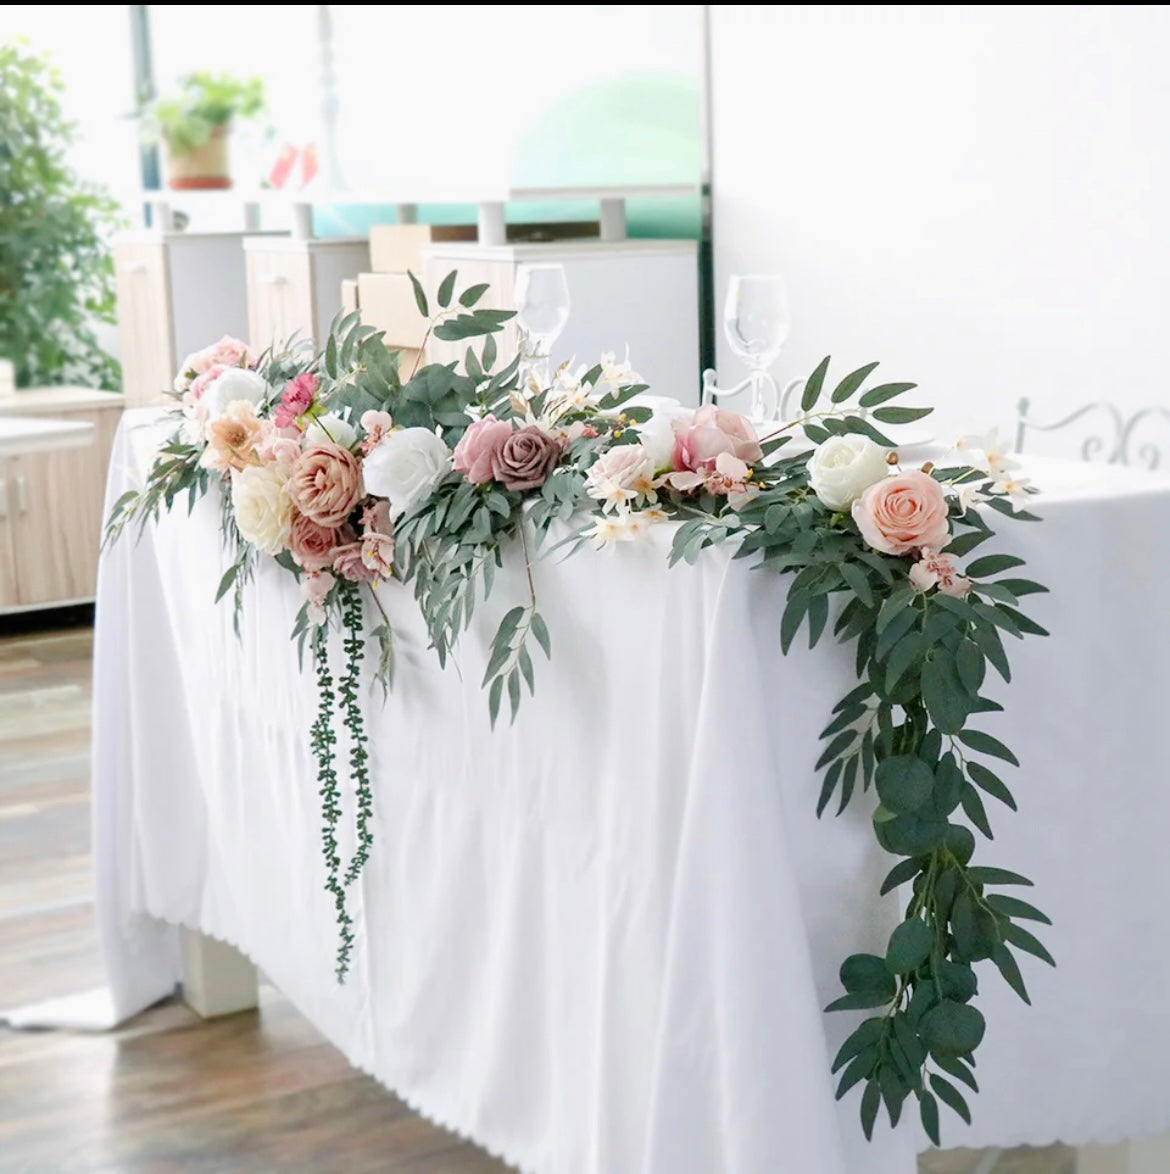 Dusty Rose Collection for Sale- Arch Swag and Table Floral Arrangement for Events - Easy to Use Ready Swag Decorations